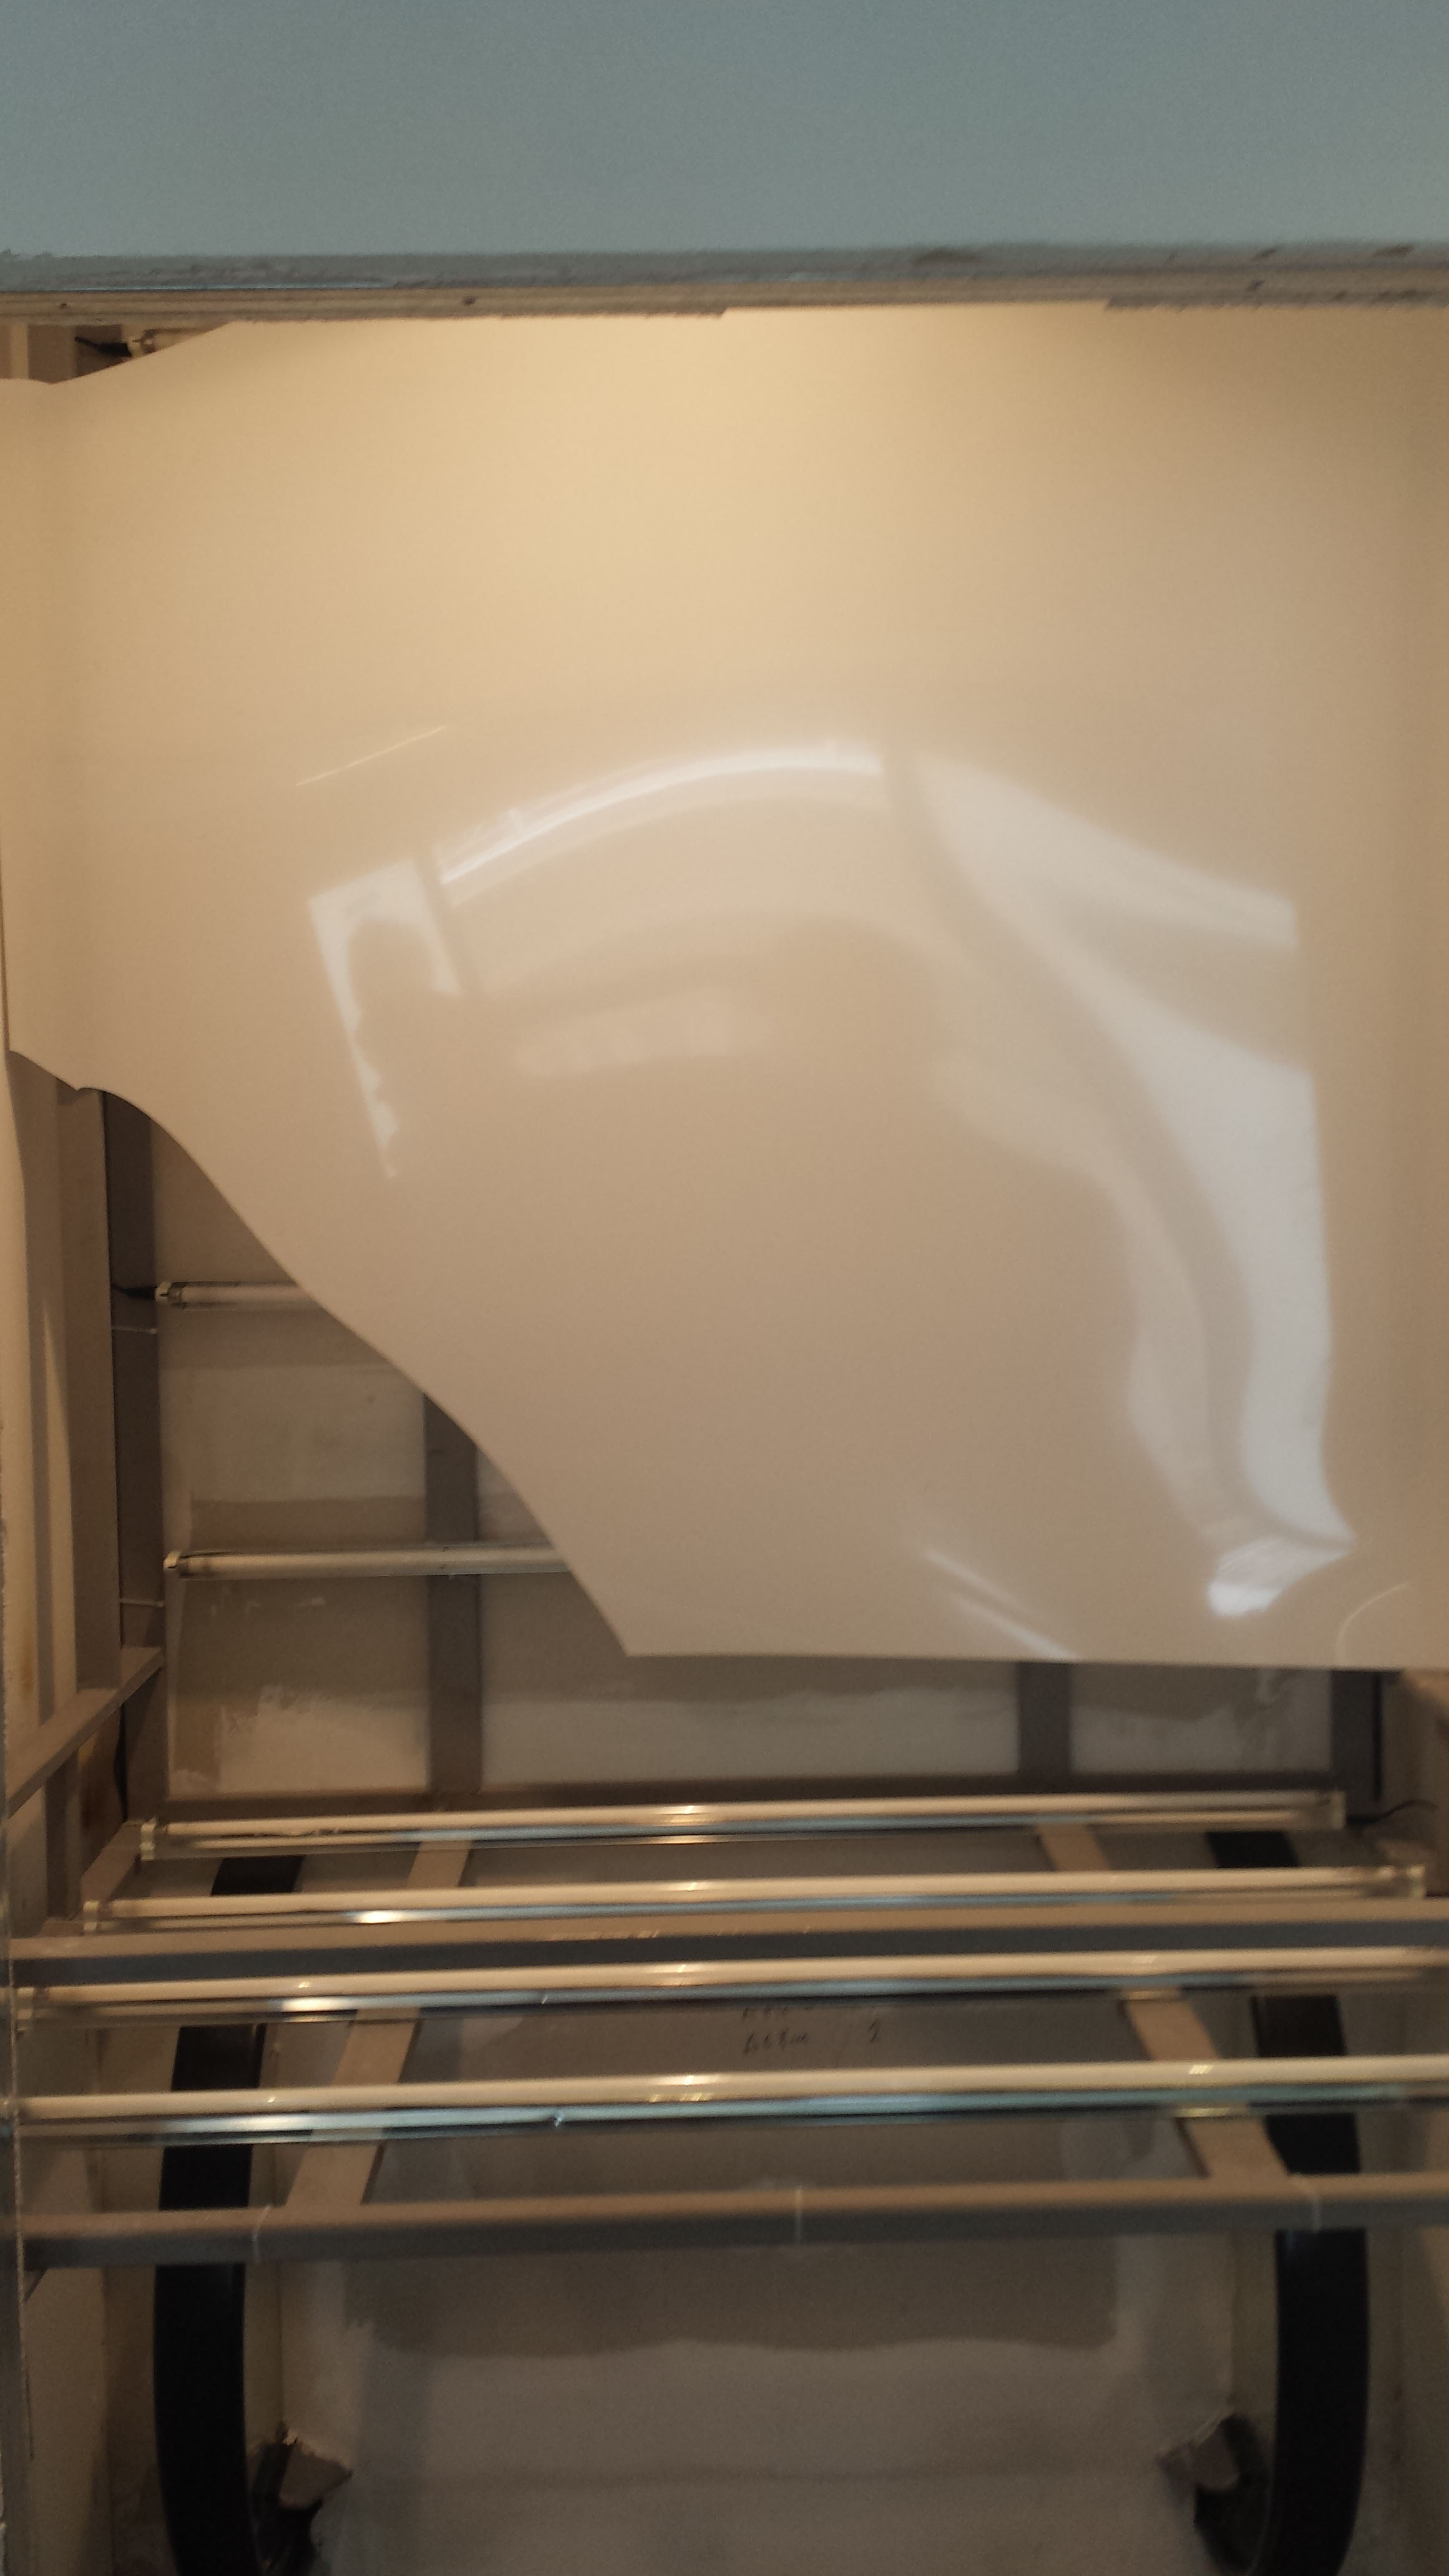 shadows - Do I need clear or opaque plexiglass for my product ...